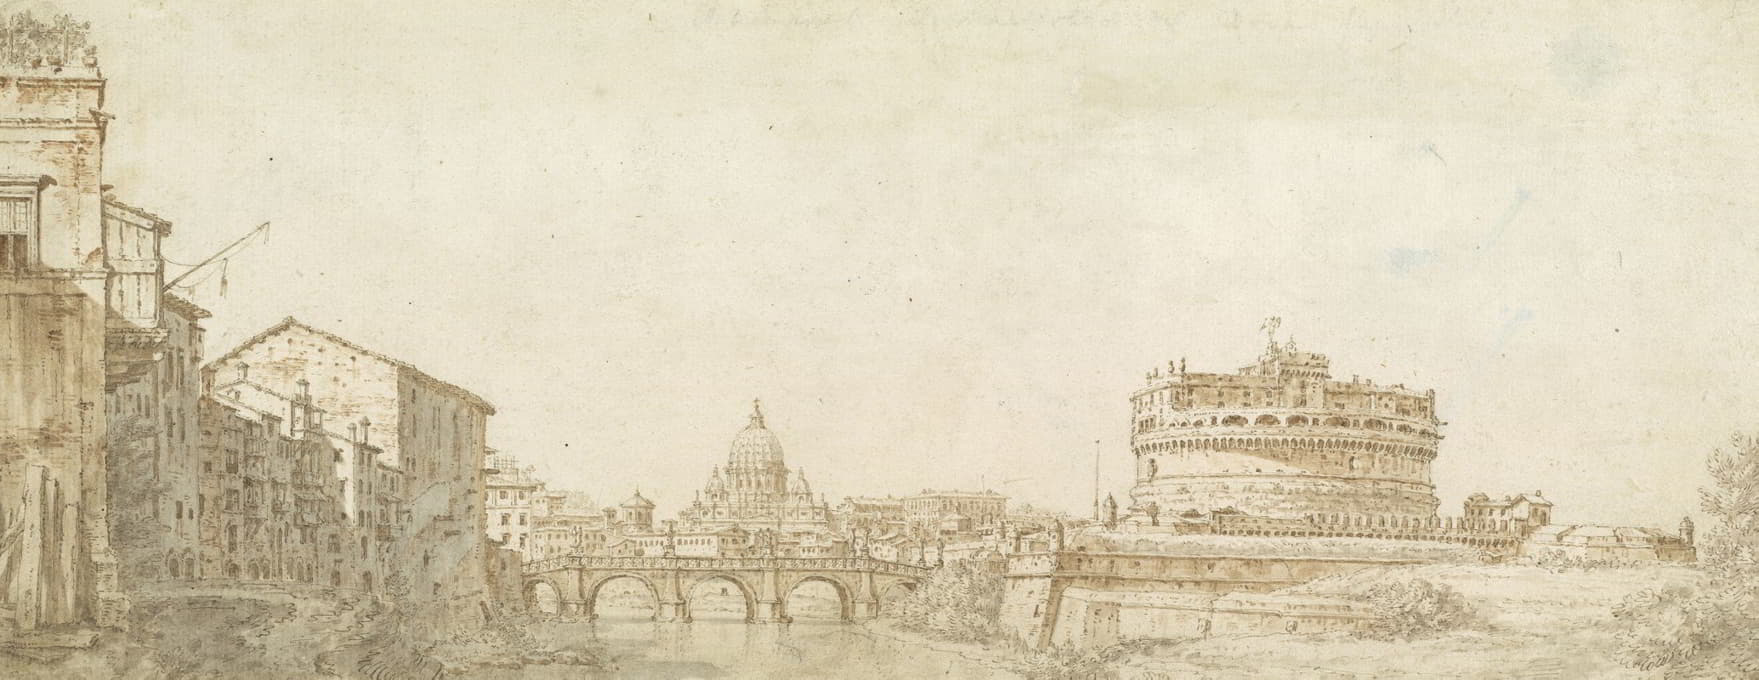 Giuseppe Zocchi - View of Rome with the Dome of Saint Peter’s and the Castel Sant’ Angelo